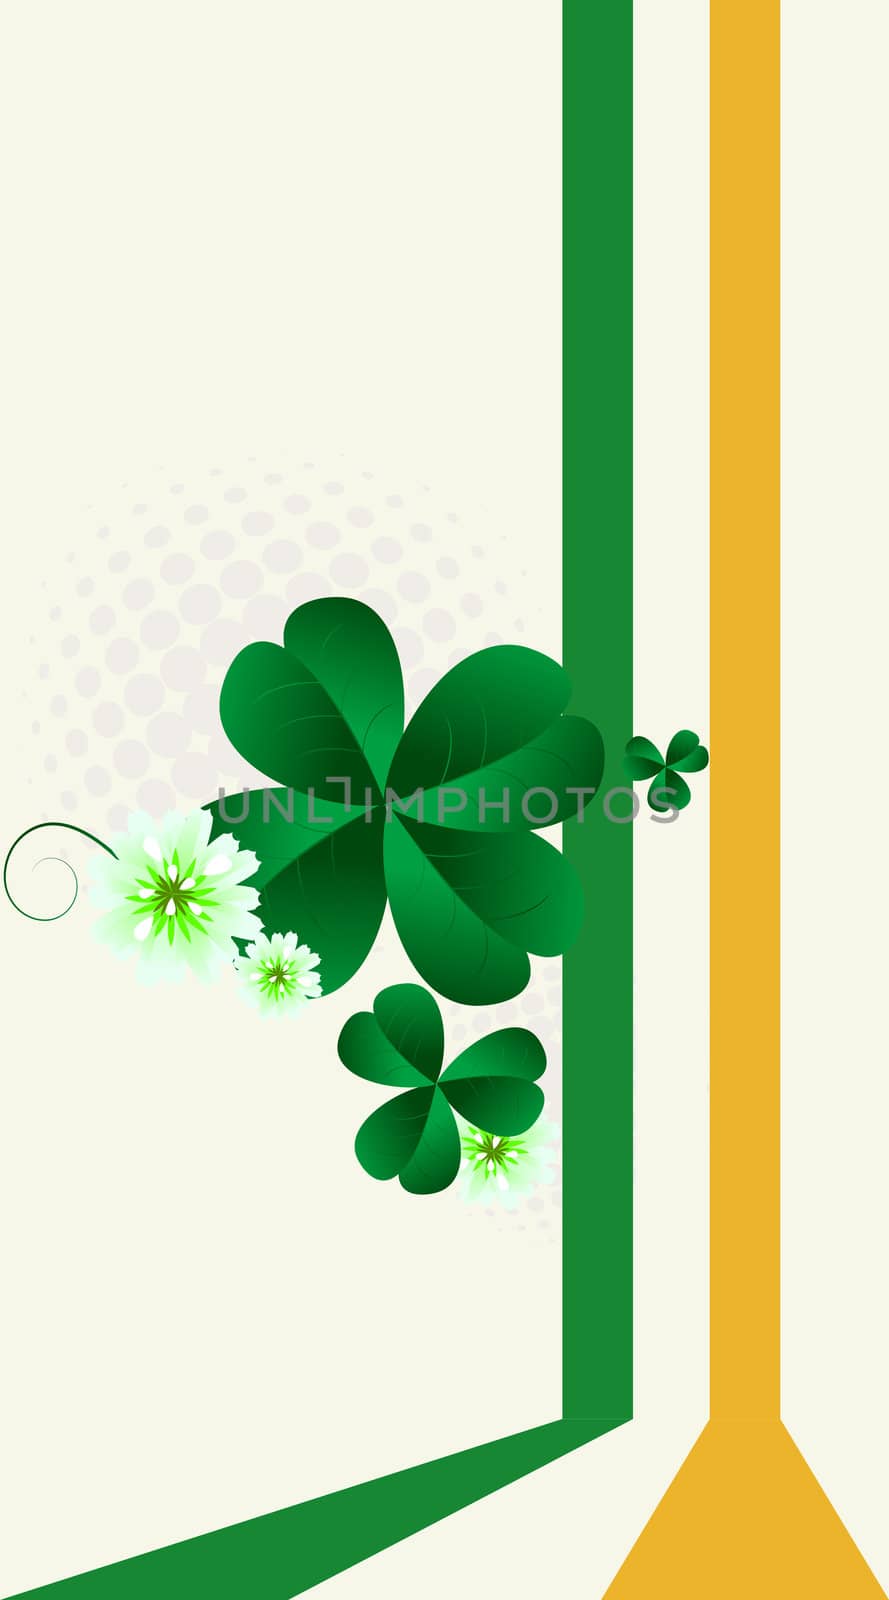 St.Patrick's Day post card by Lirch